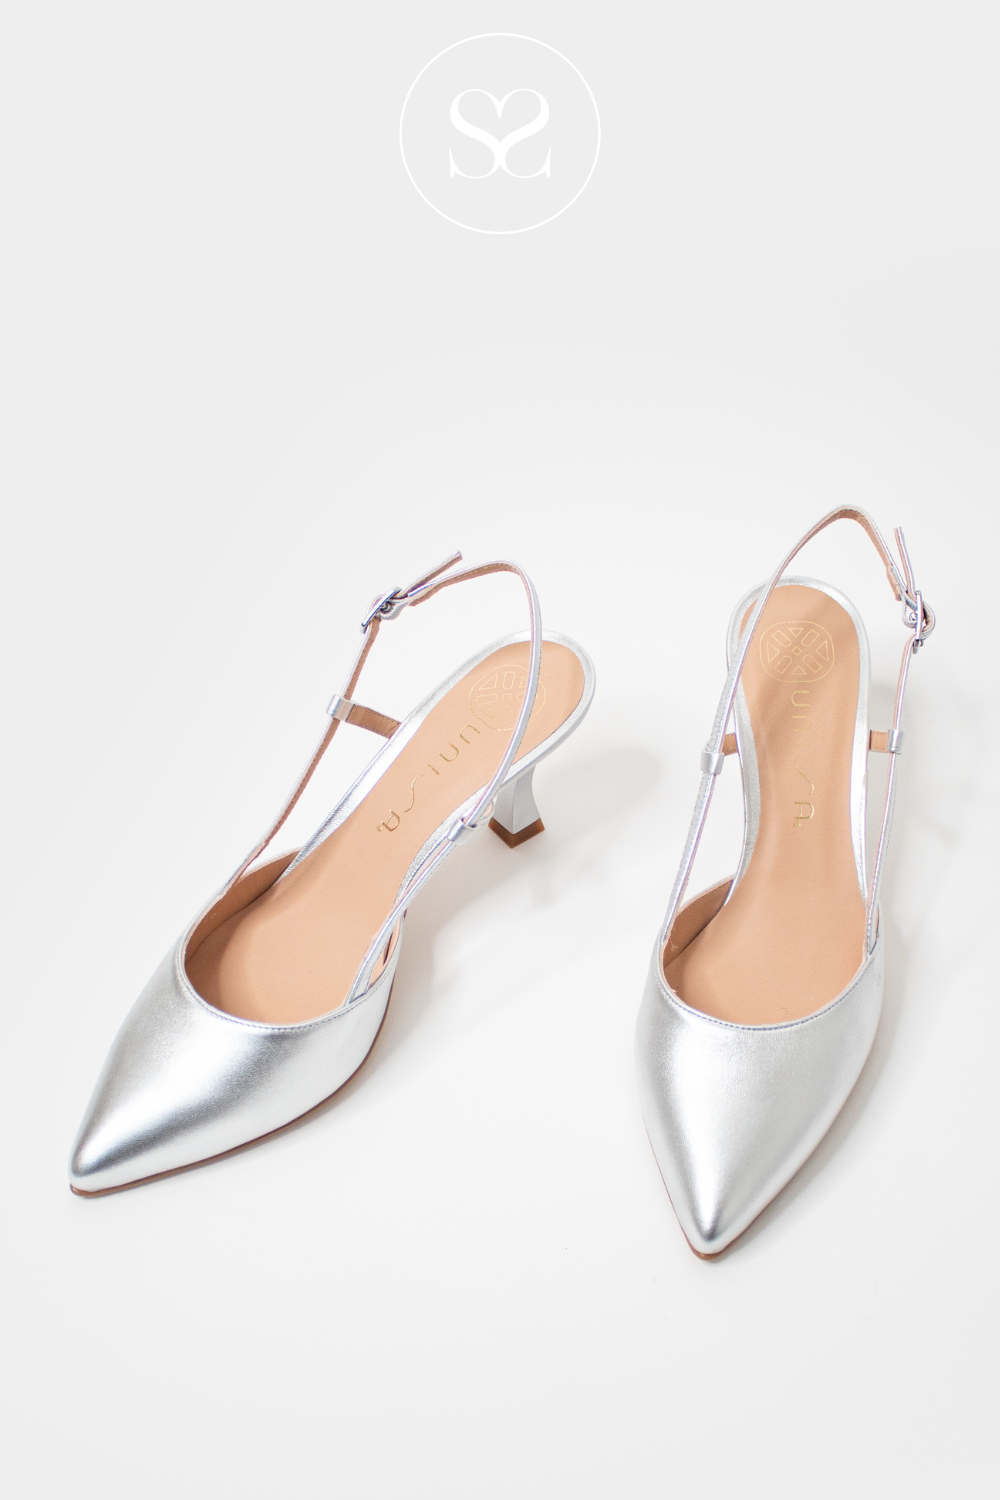 UNISA KLEEF SILVER METALLIC LEATHER SLINGBACK POINTED TOE LOW HEEL WITH ADJUSTABLE ANKLE STRAP